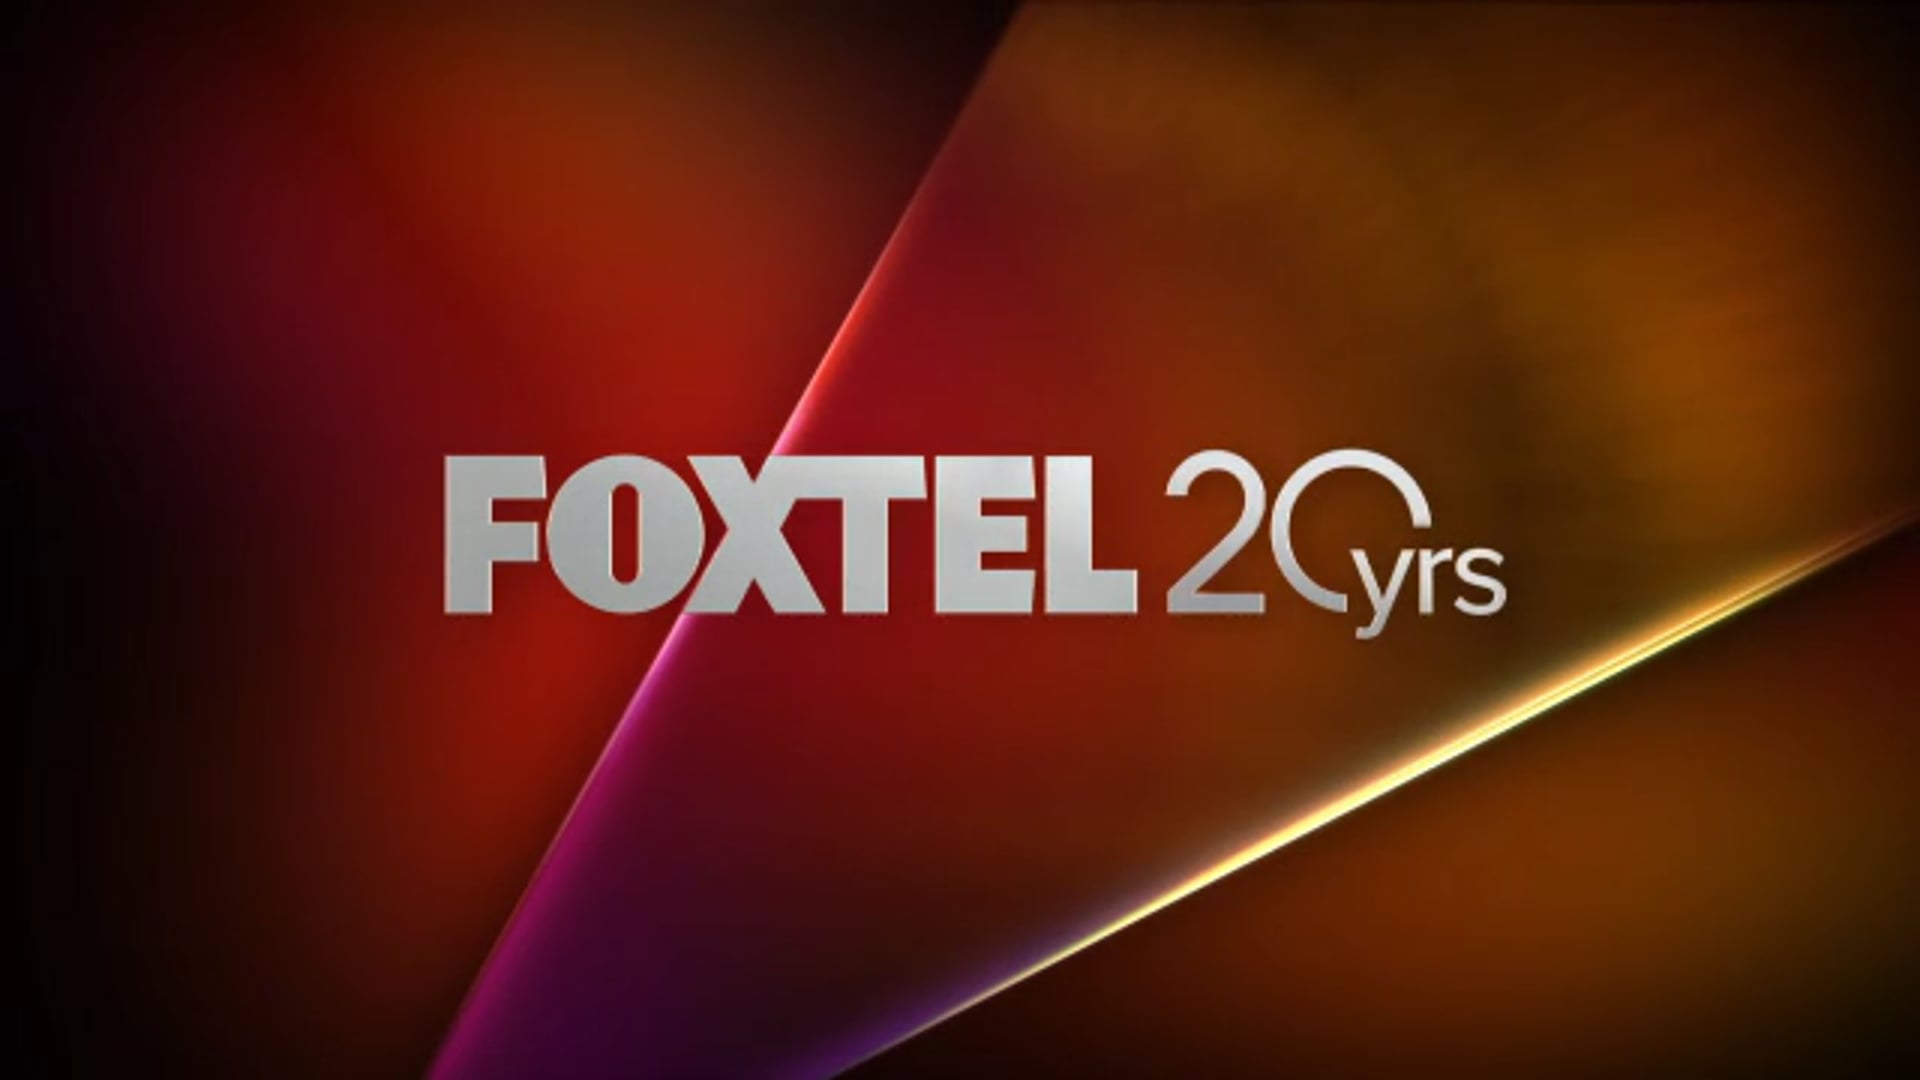 SIZZLE VIDEO I Corporate Video I 20 YEARS OF FOXTEL